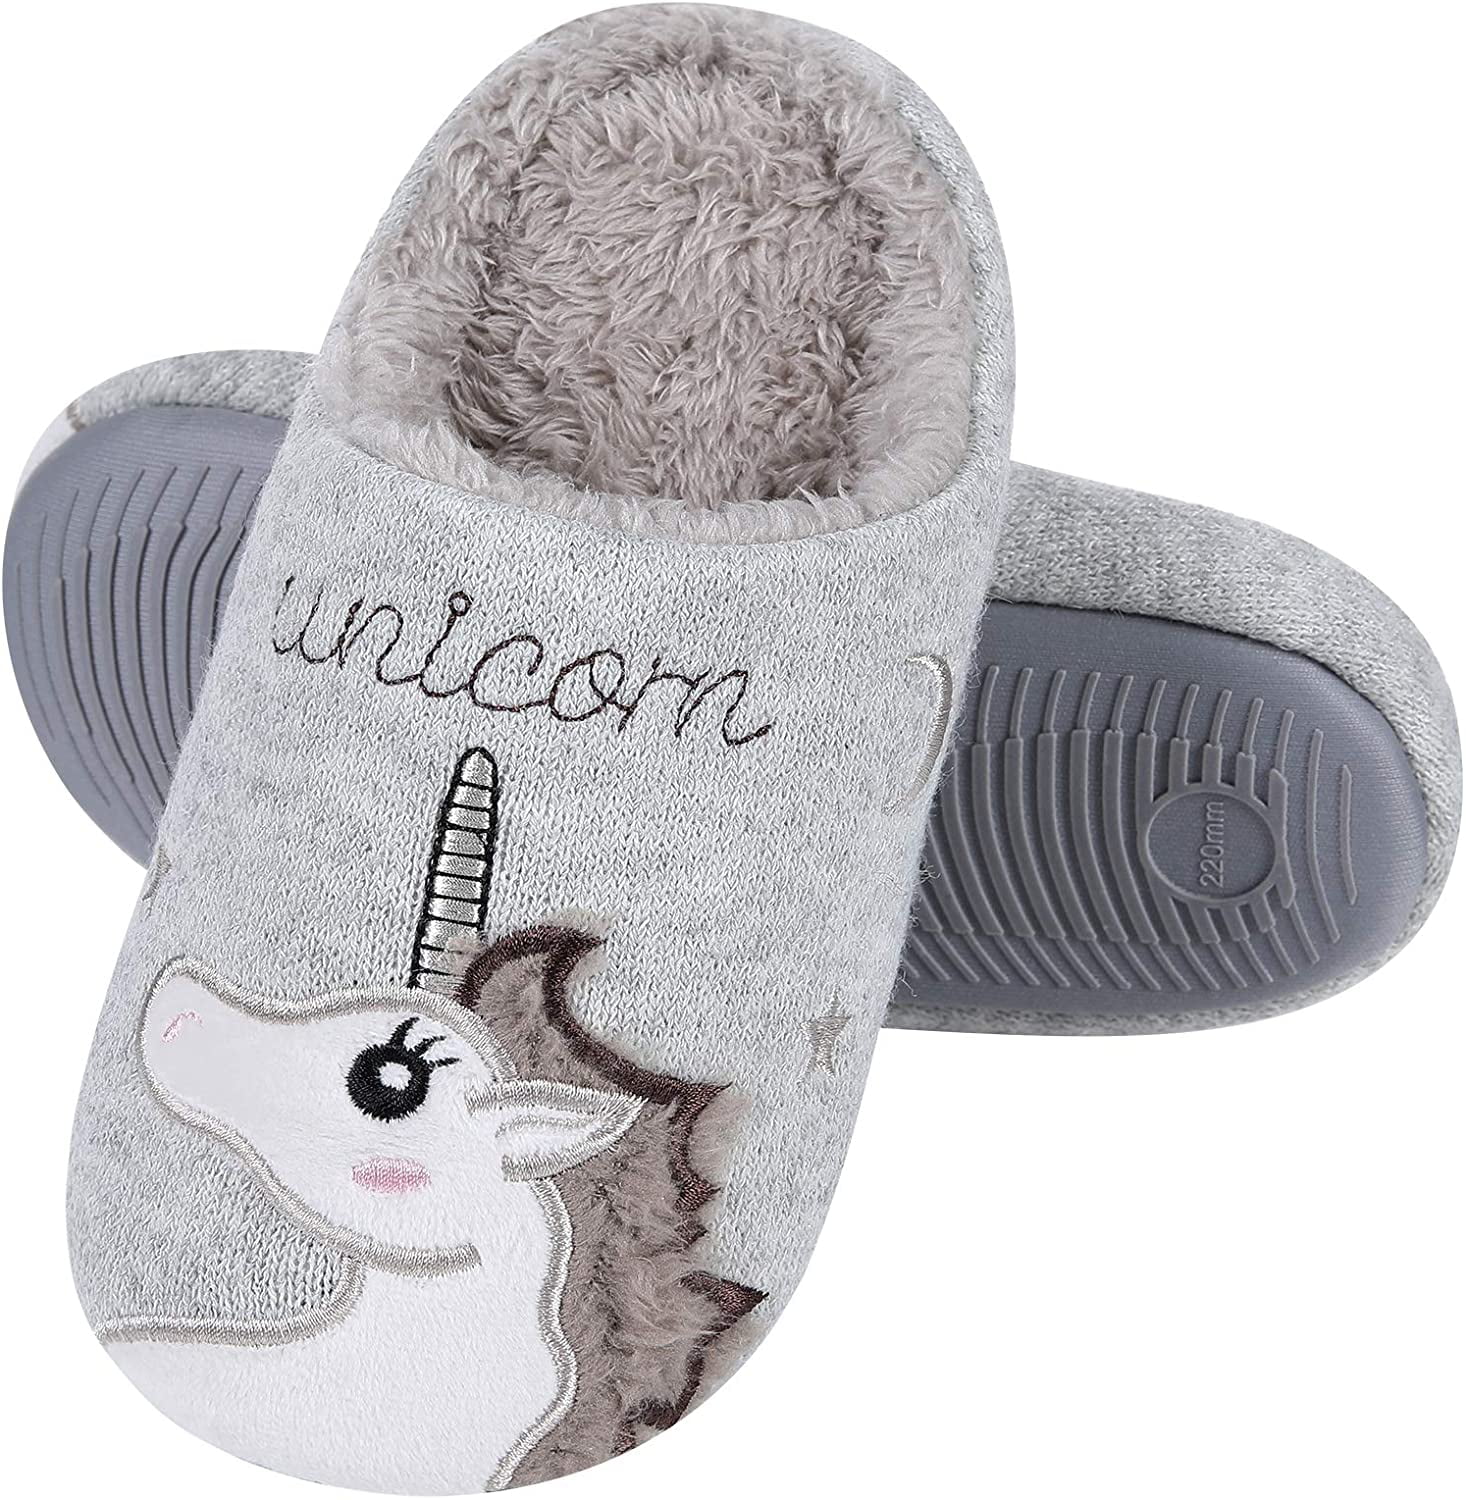 Girl's Cute Unicorn House Slippers Memory Foam Indoor Slippers Comfy Fuzzy Knitted Slip On Cotton Slippers with Anti-Slip Rubber Sole 